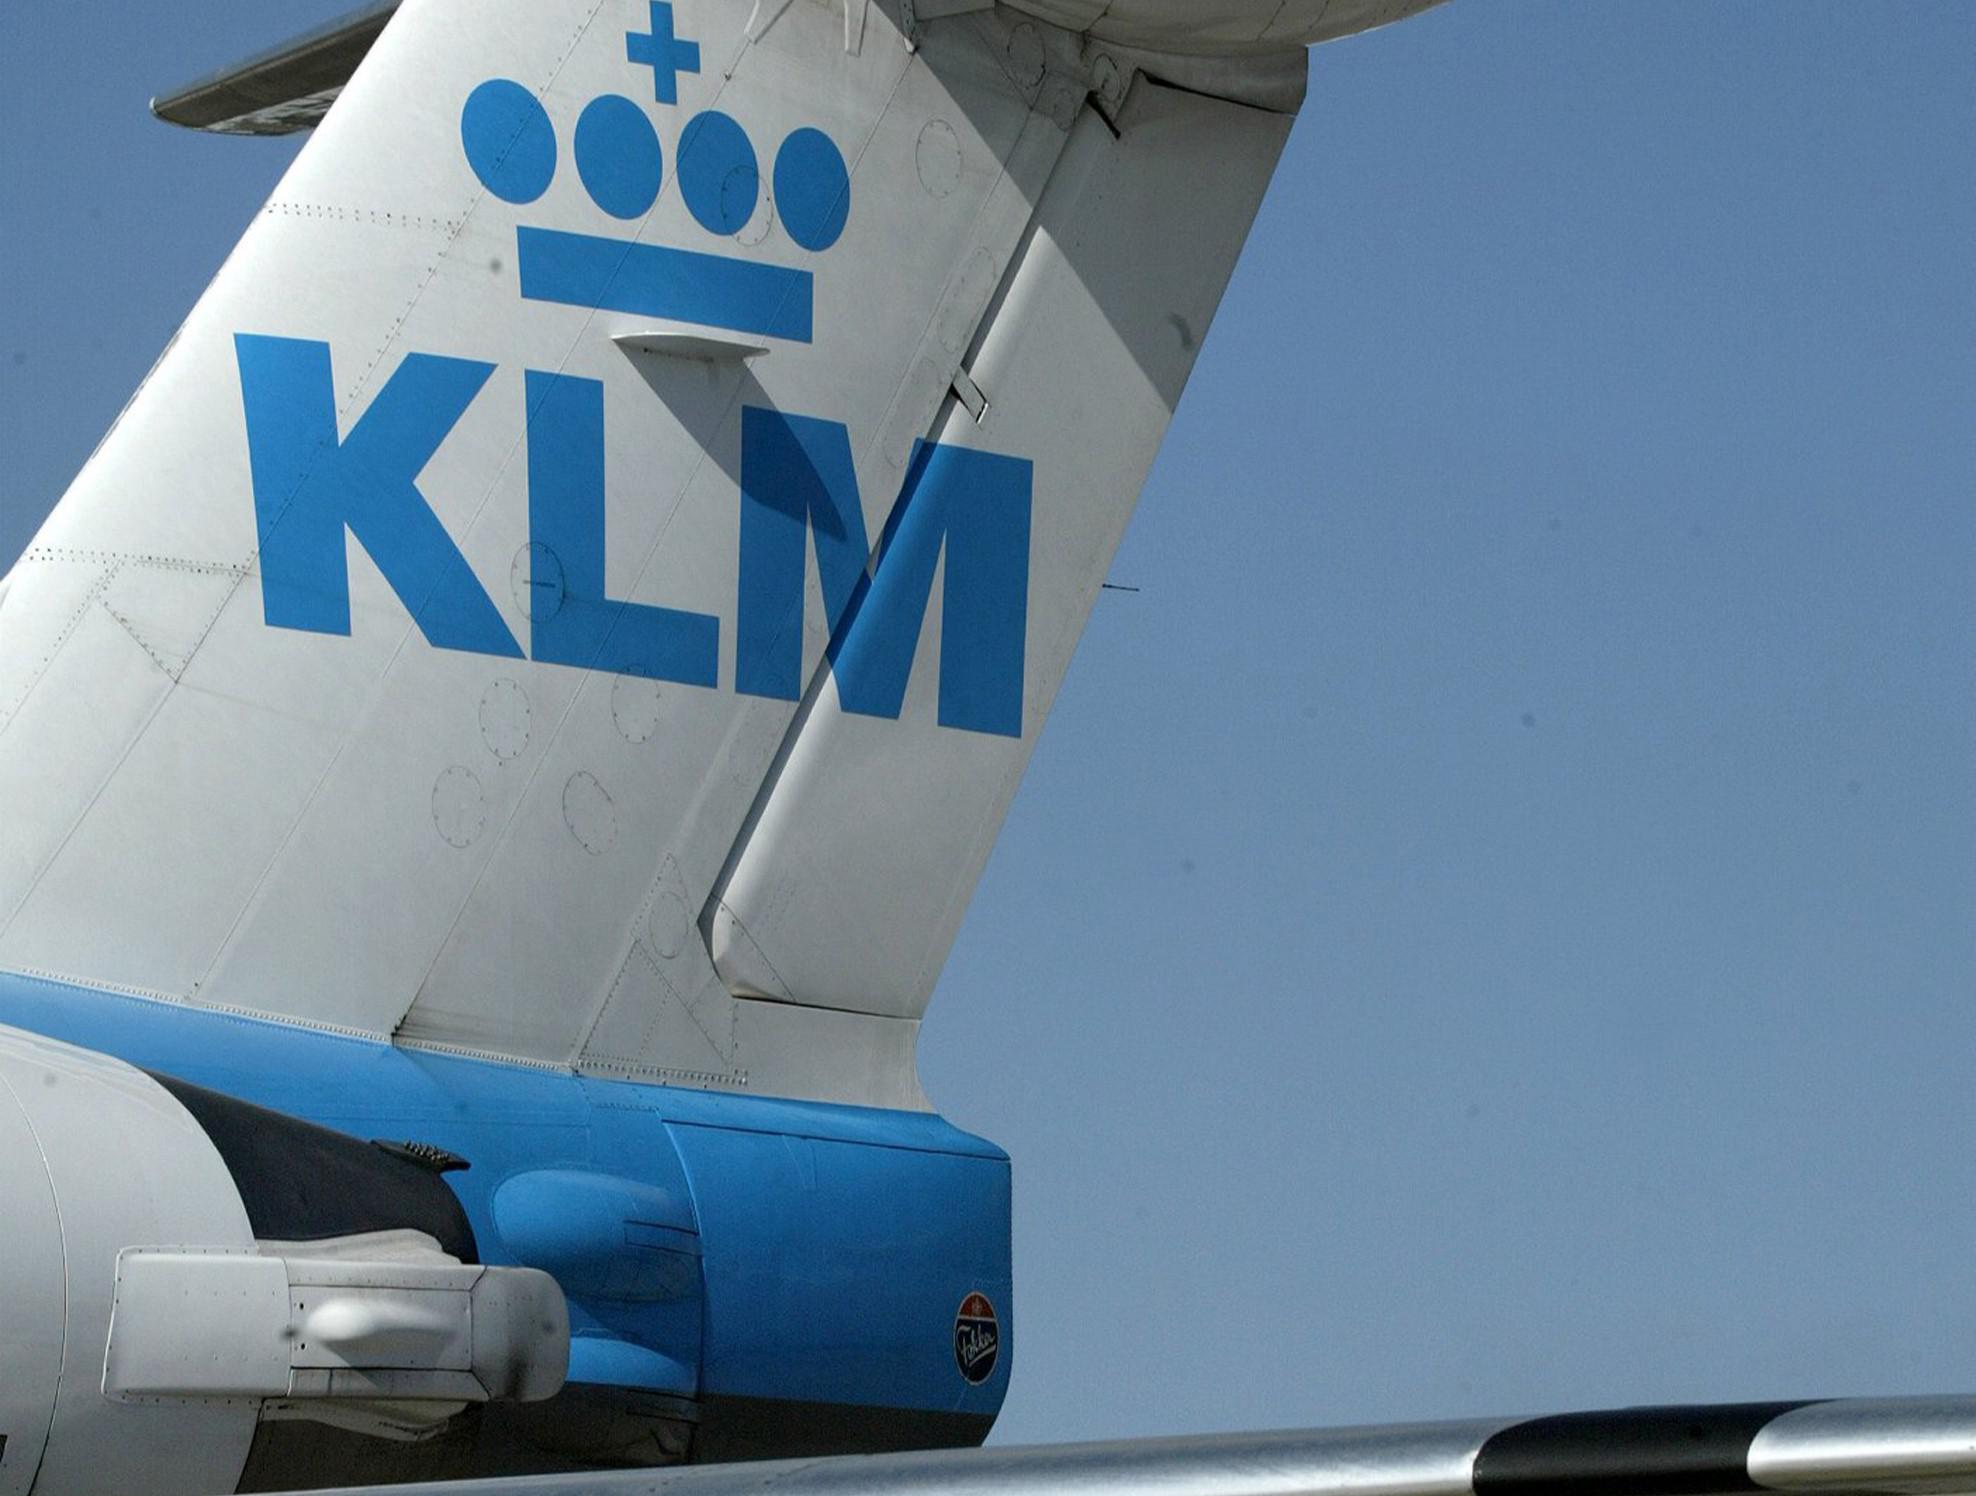 Crashed into the engine of a KLM airplane, he died on the runway